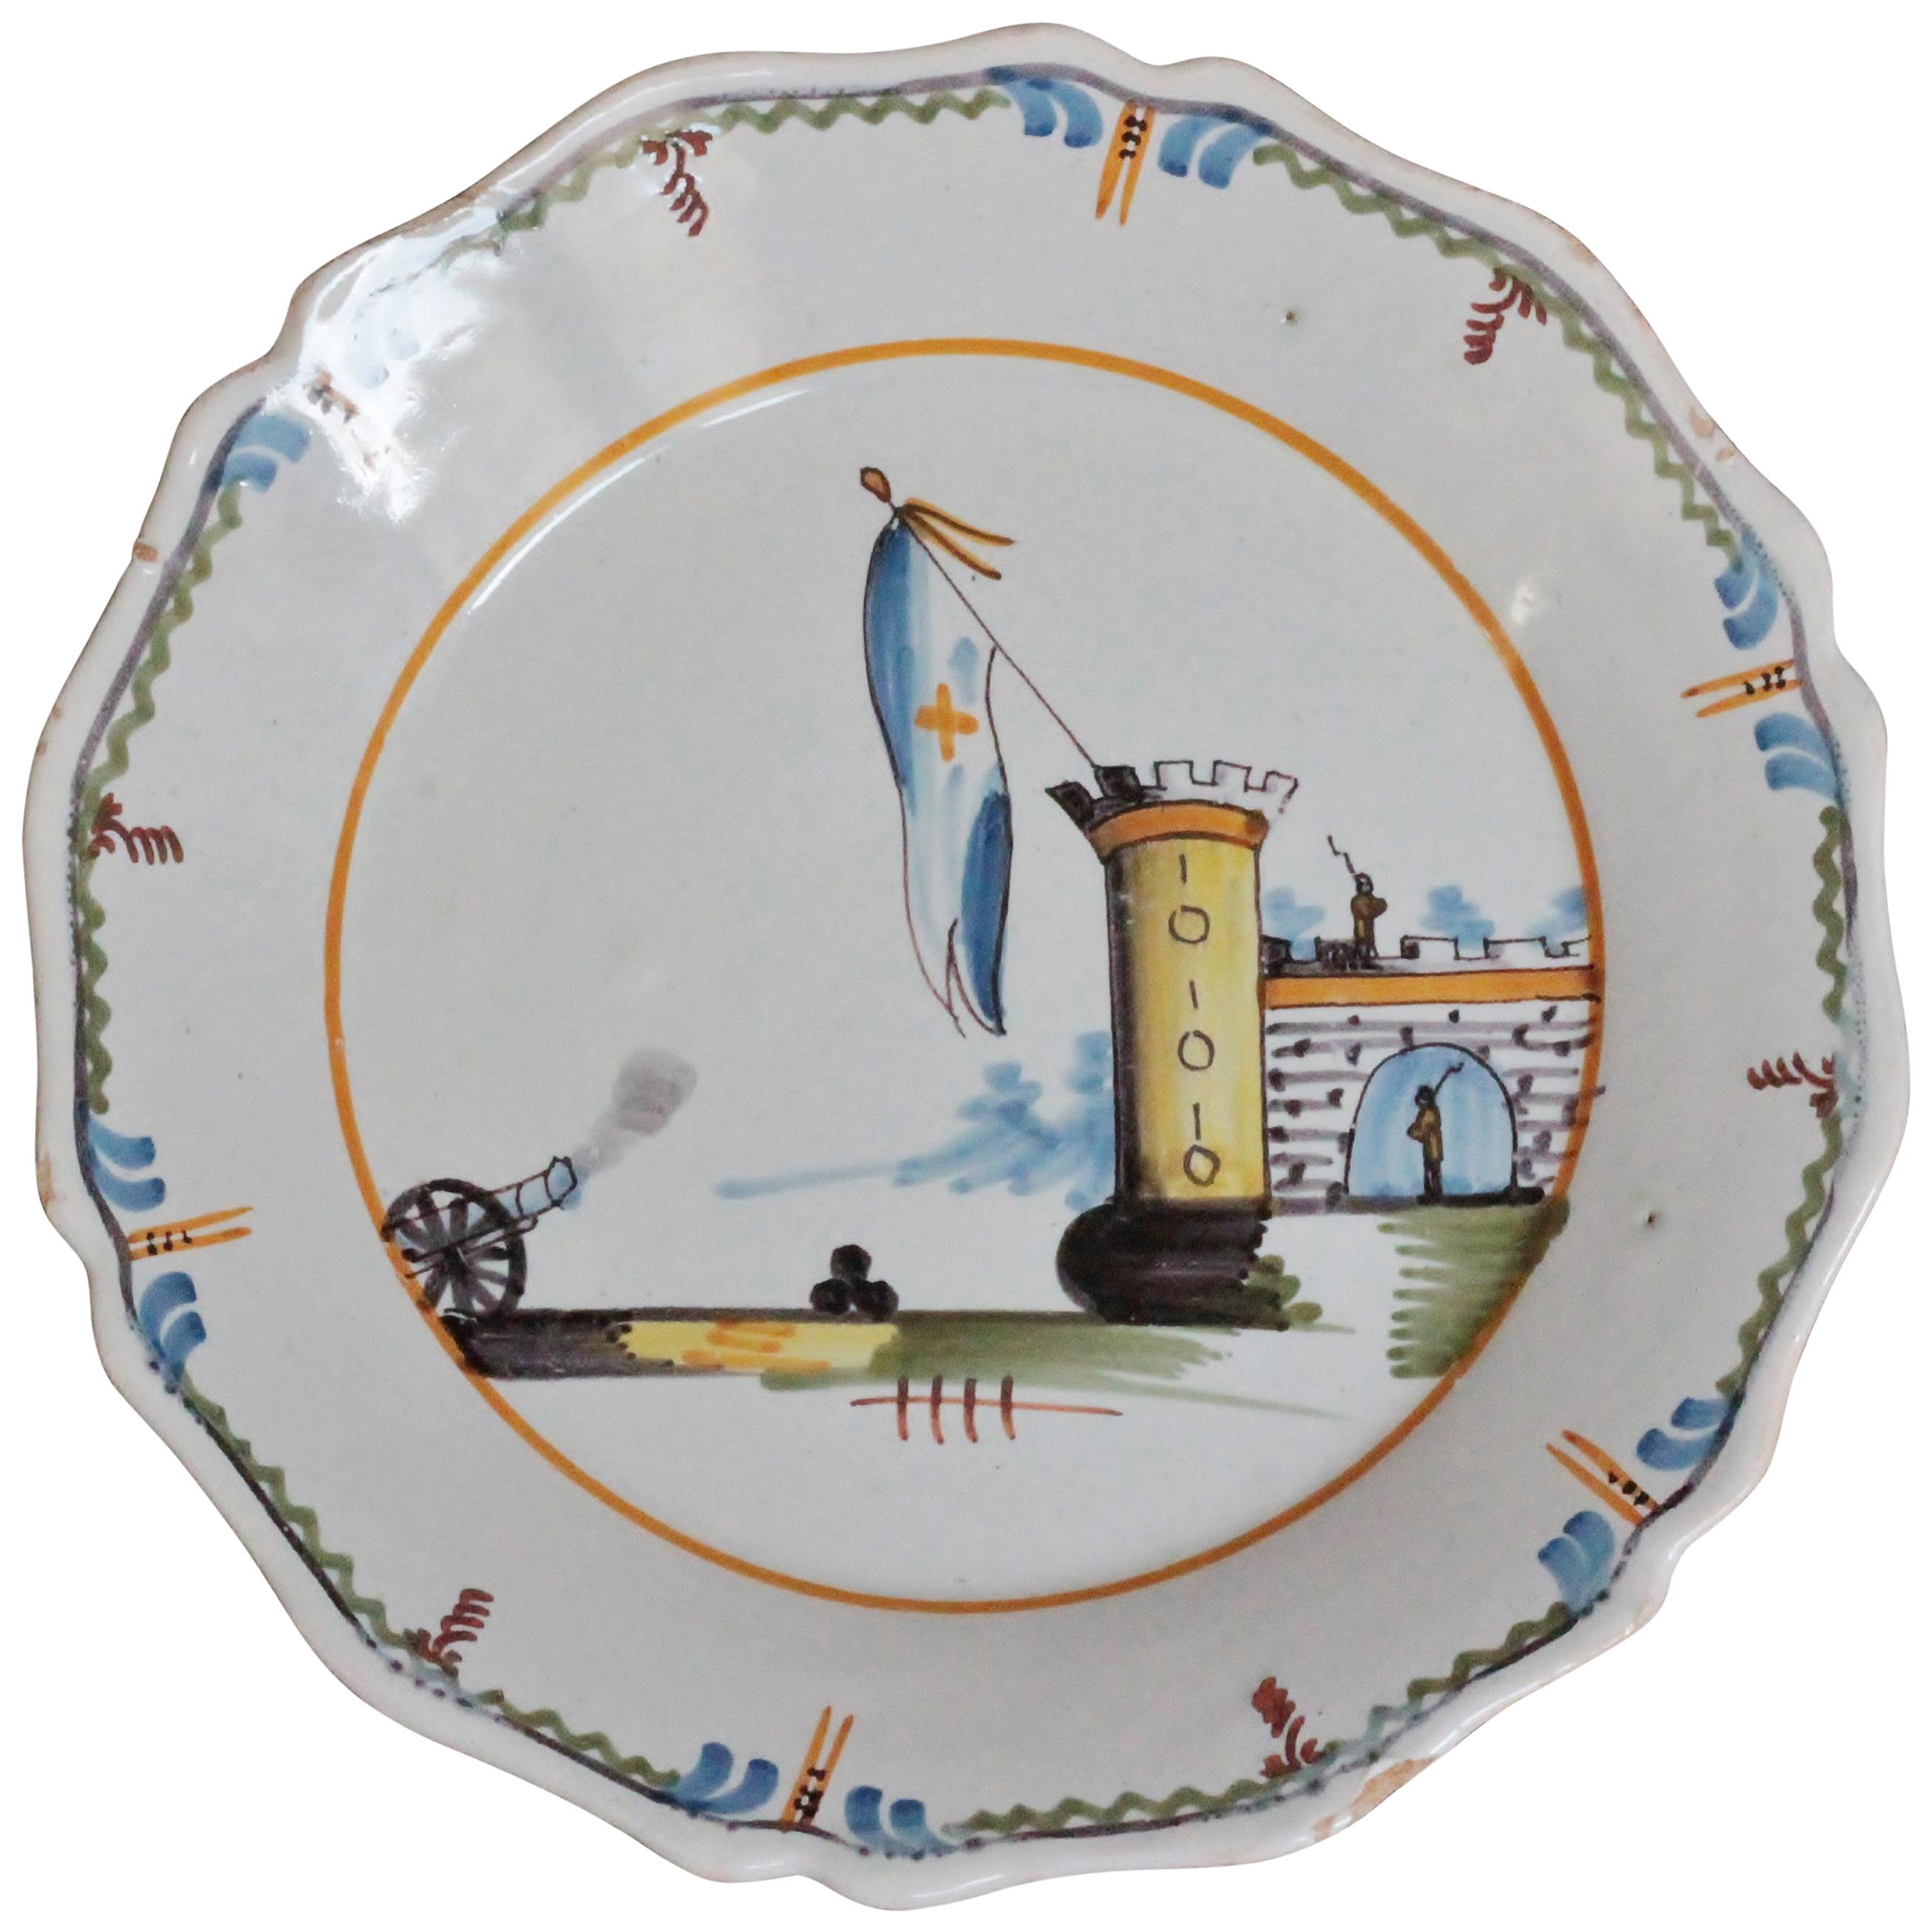 Nevers 'France' Faience Plate of Revolutionary Period, 18th Century For Sale